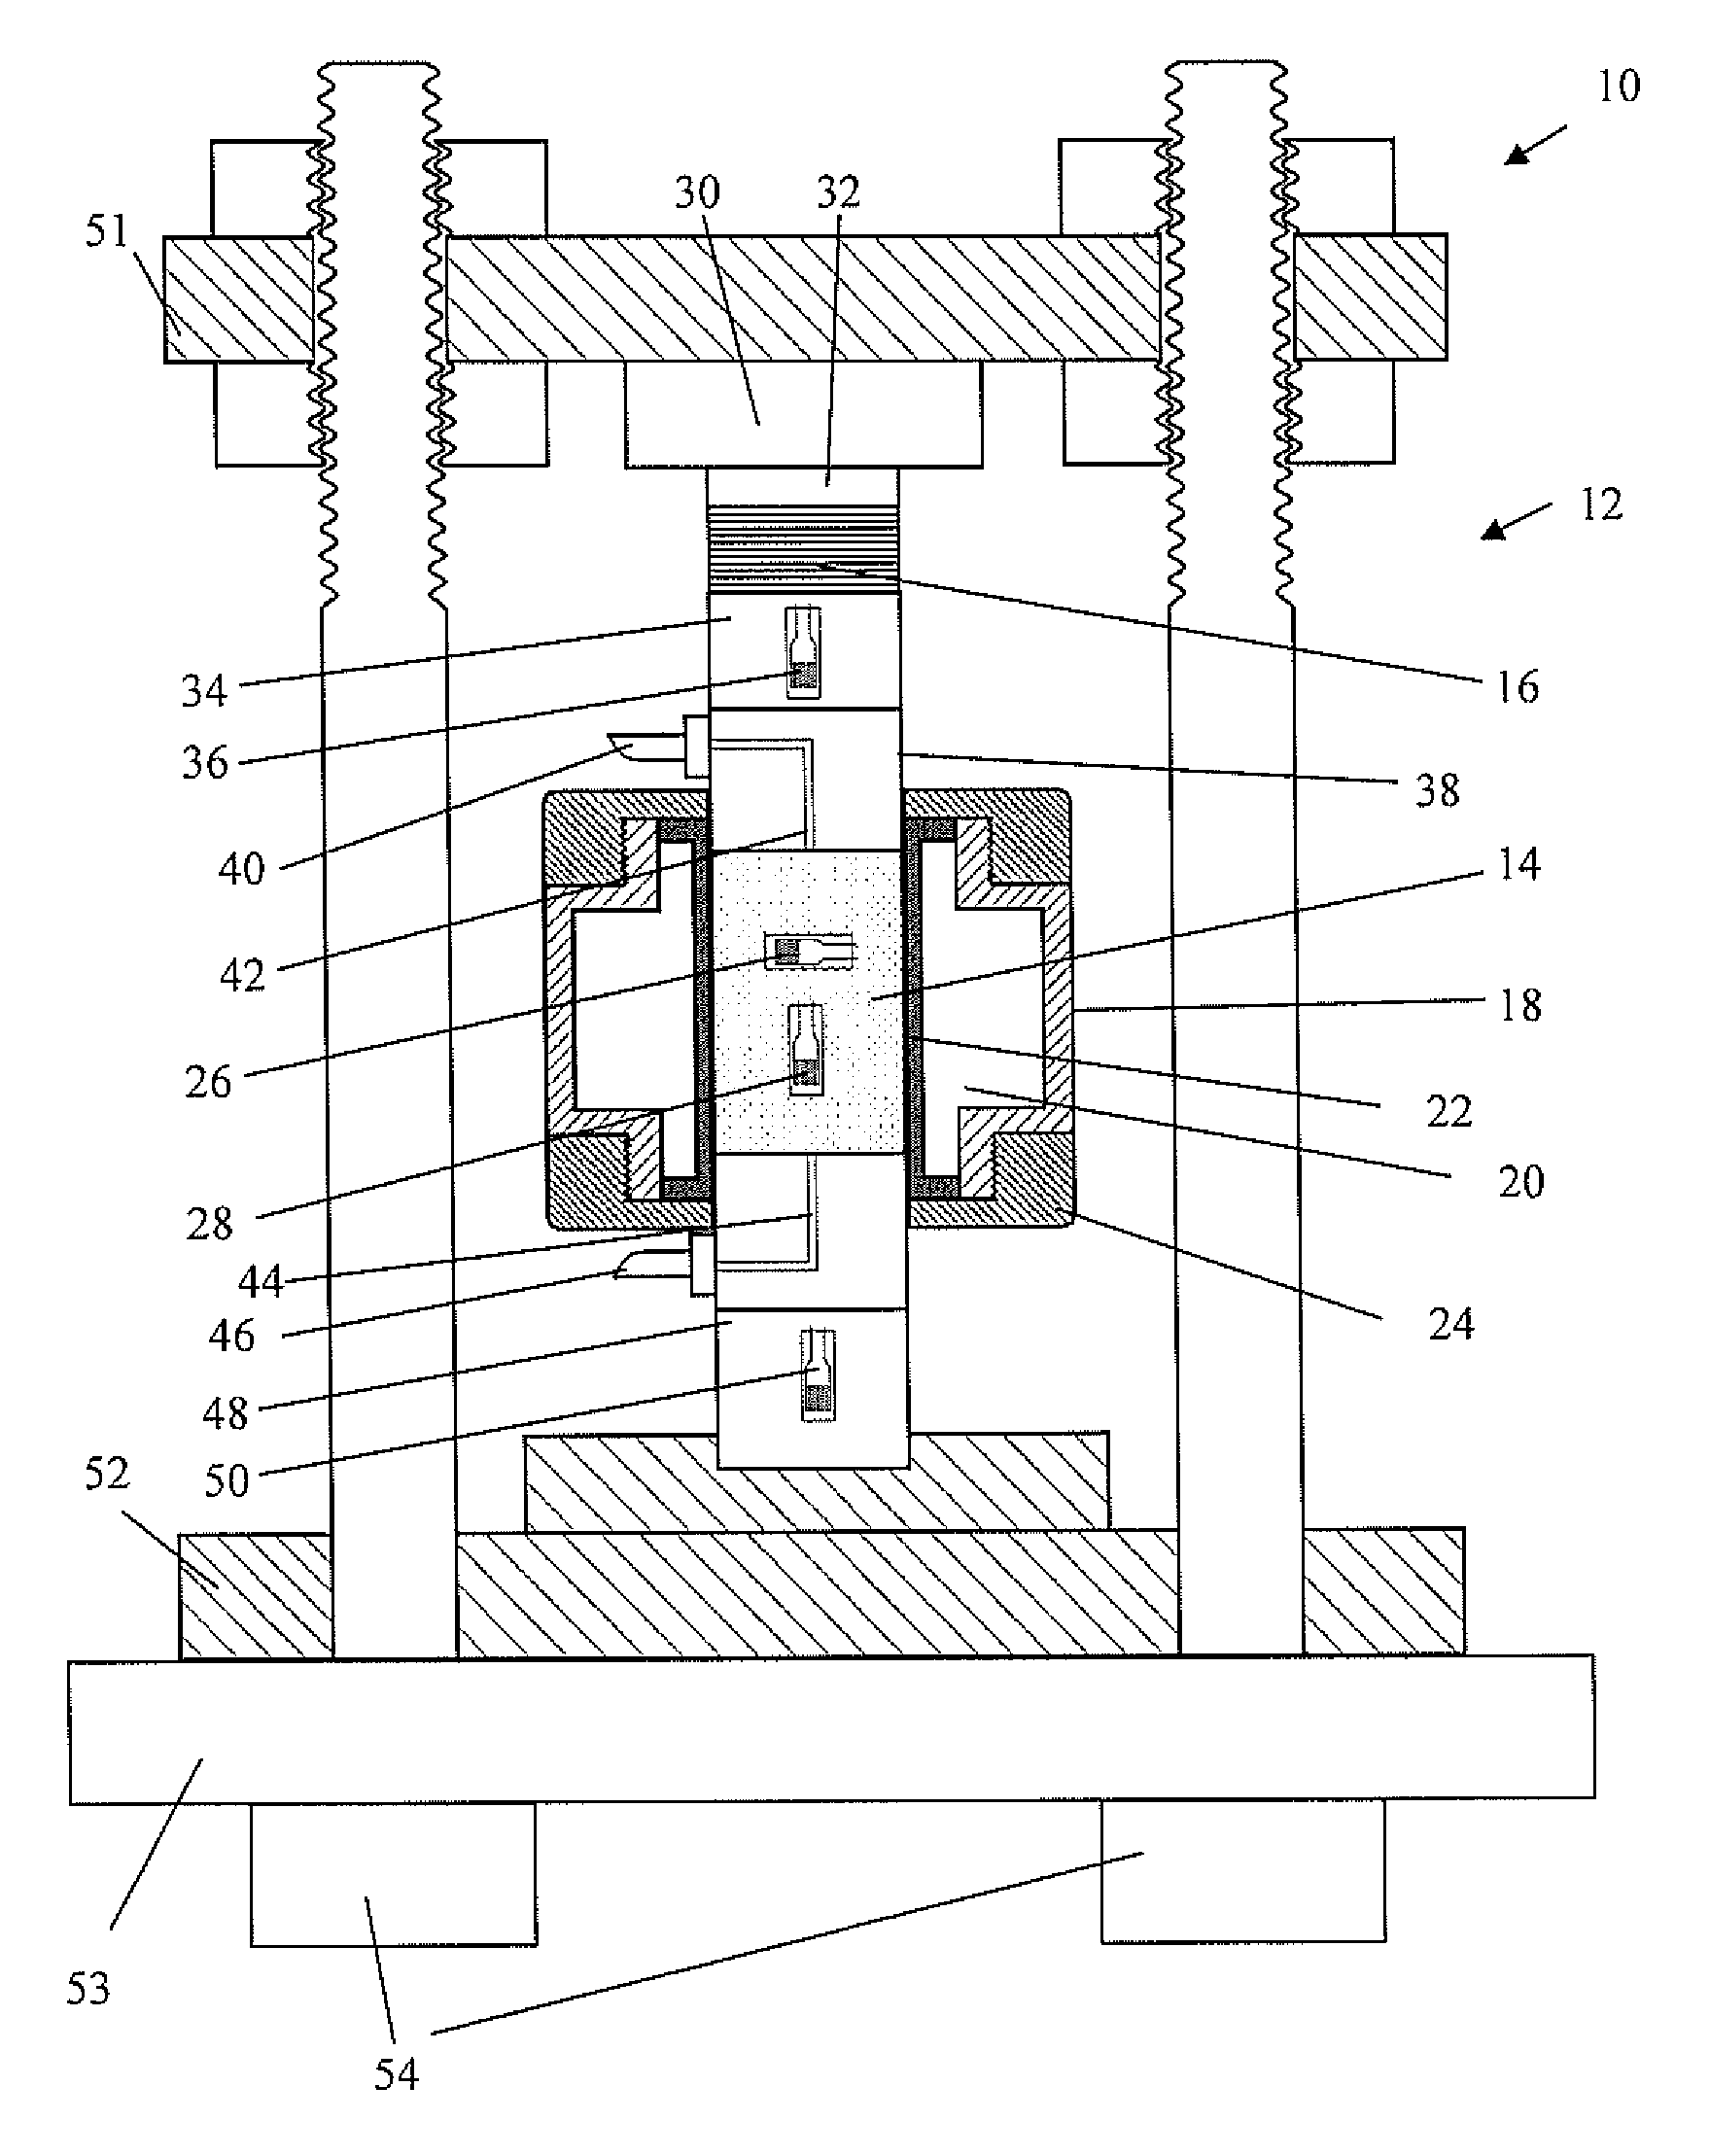 Apparatus for and a method of characterising mechanical properties of a sample